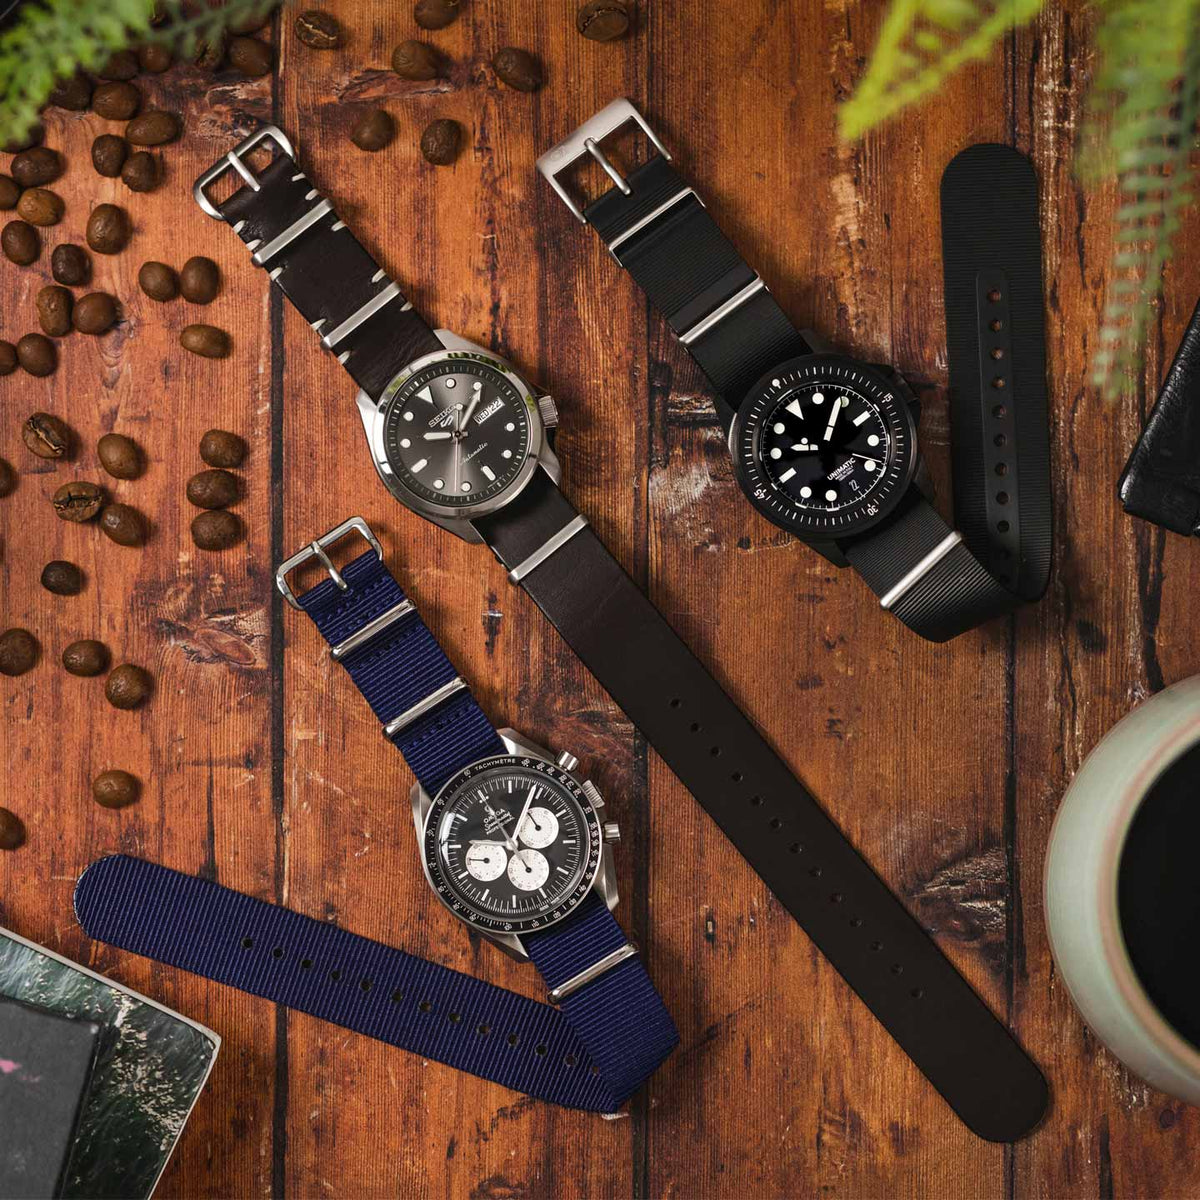 What Is A NATO Watch Strap?